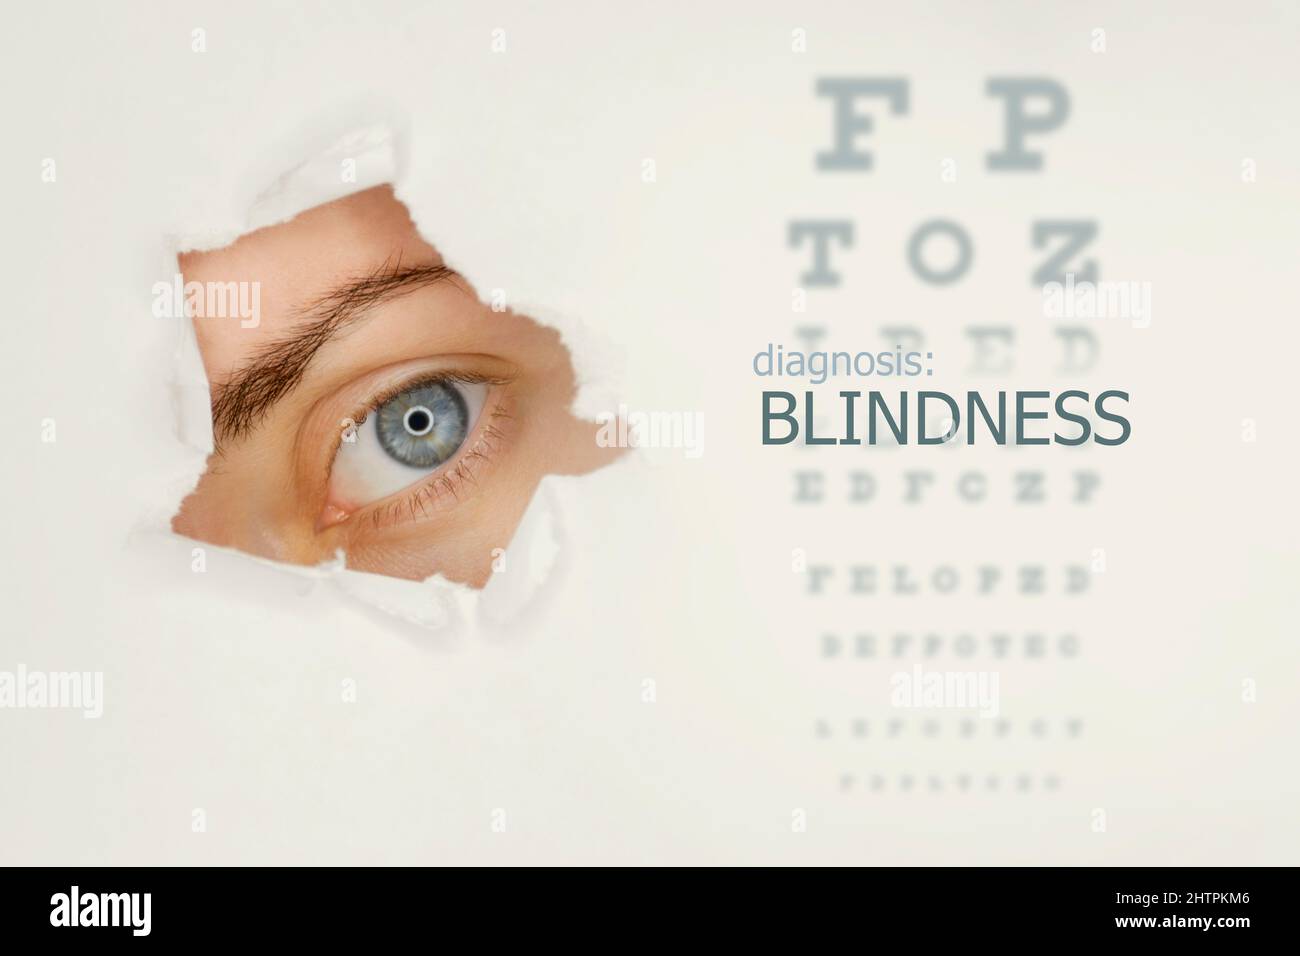 Blindness disease poster with eye test chart and blue eye on left. Studio grey background Stock Photo